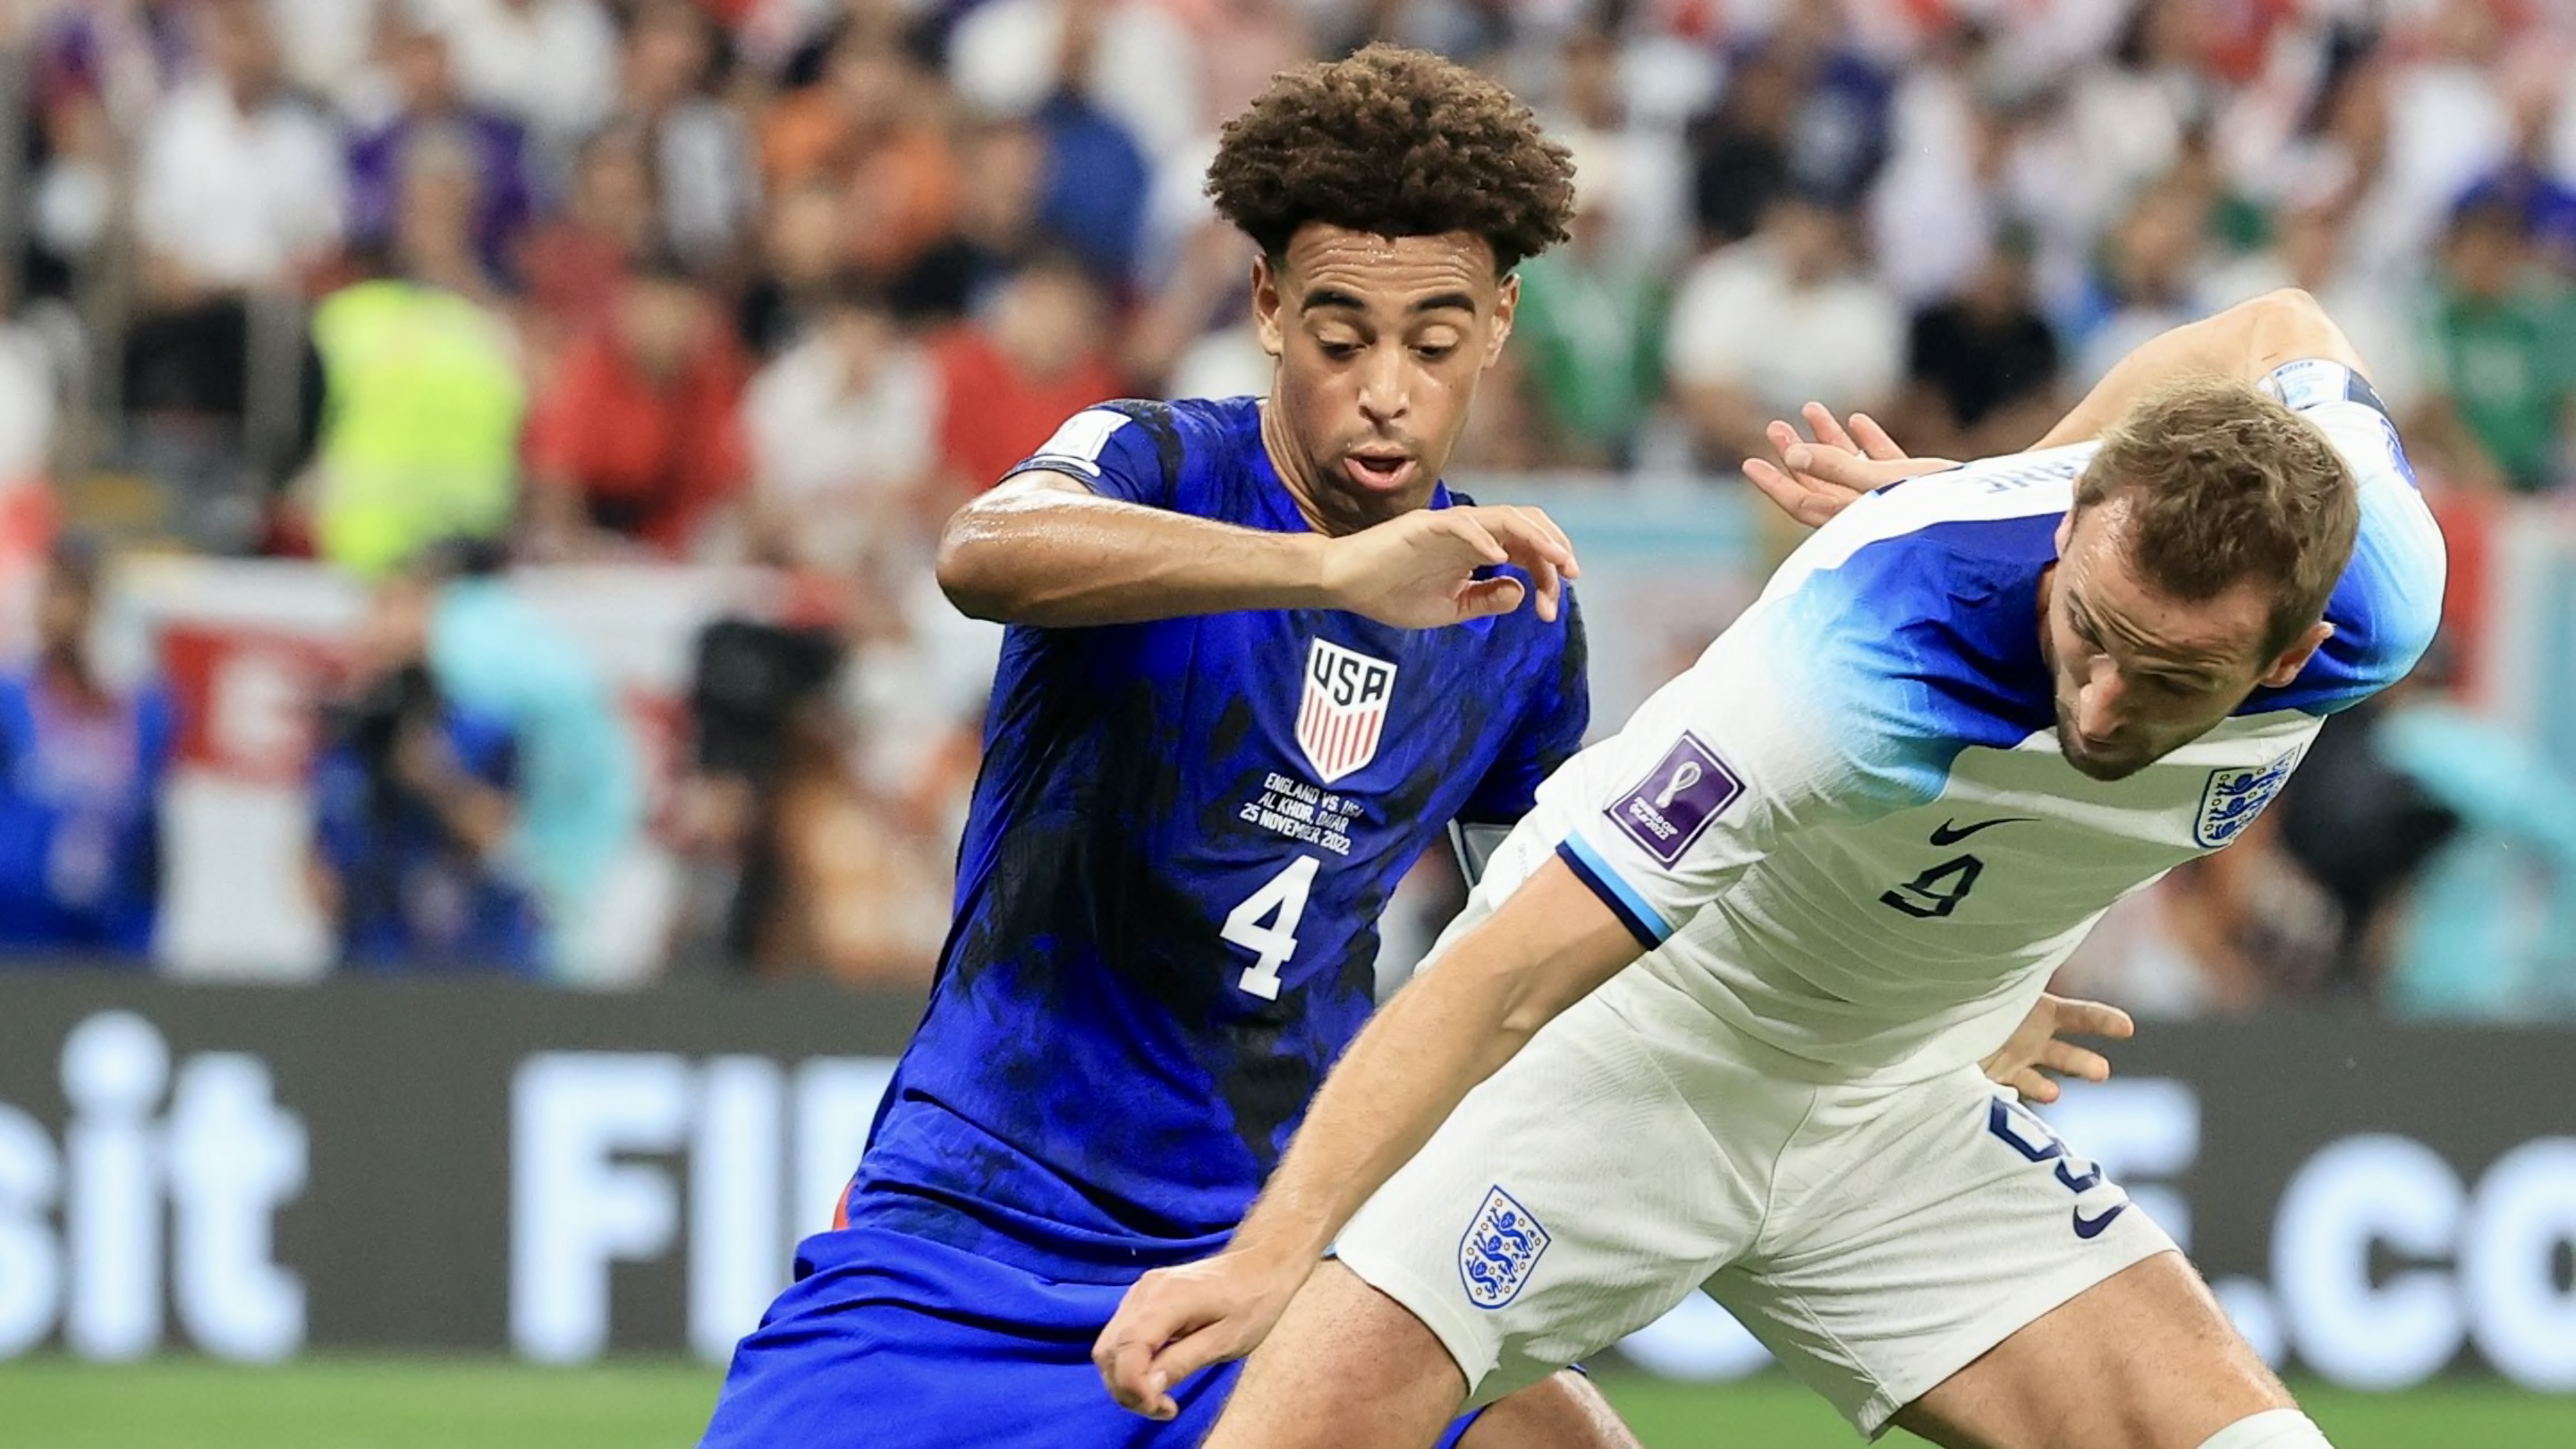 Soccer & football call it a draw as USMNT & England stay in control of their own World Cup destinies 